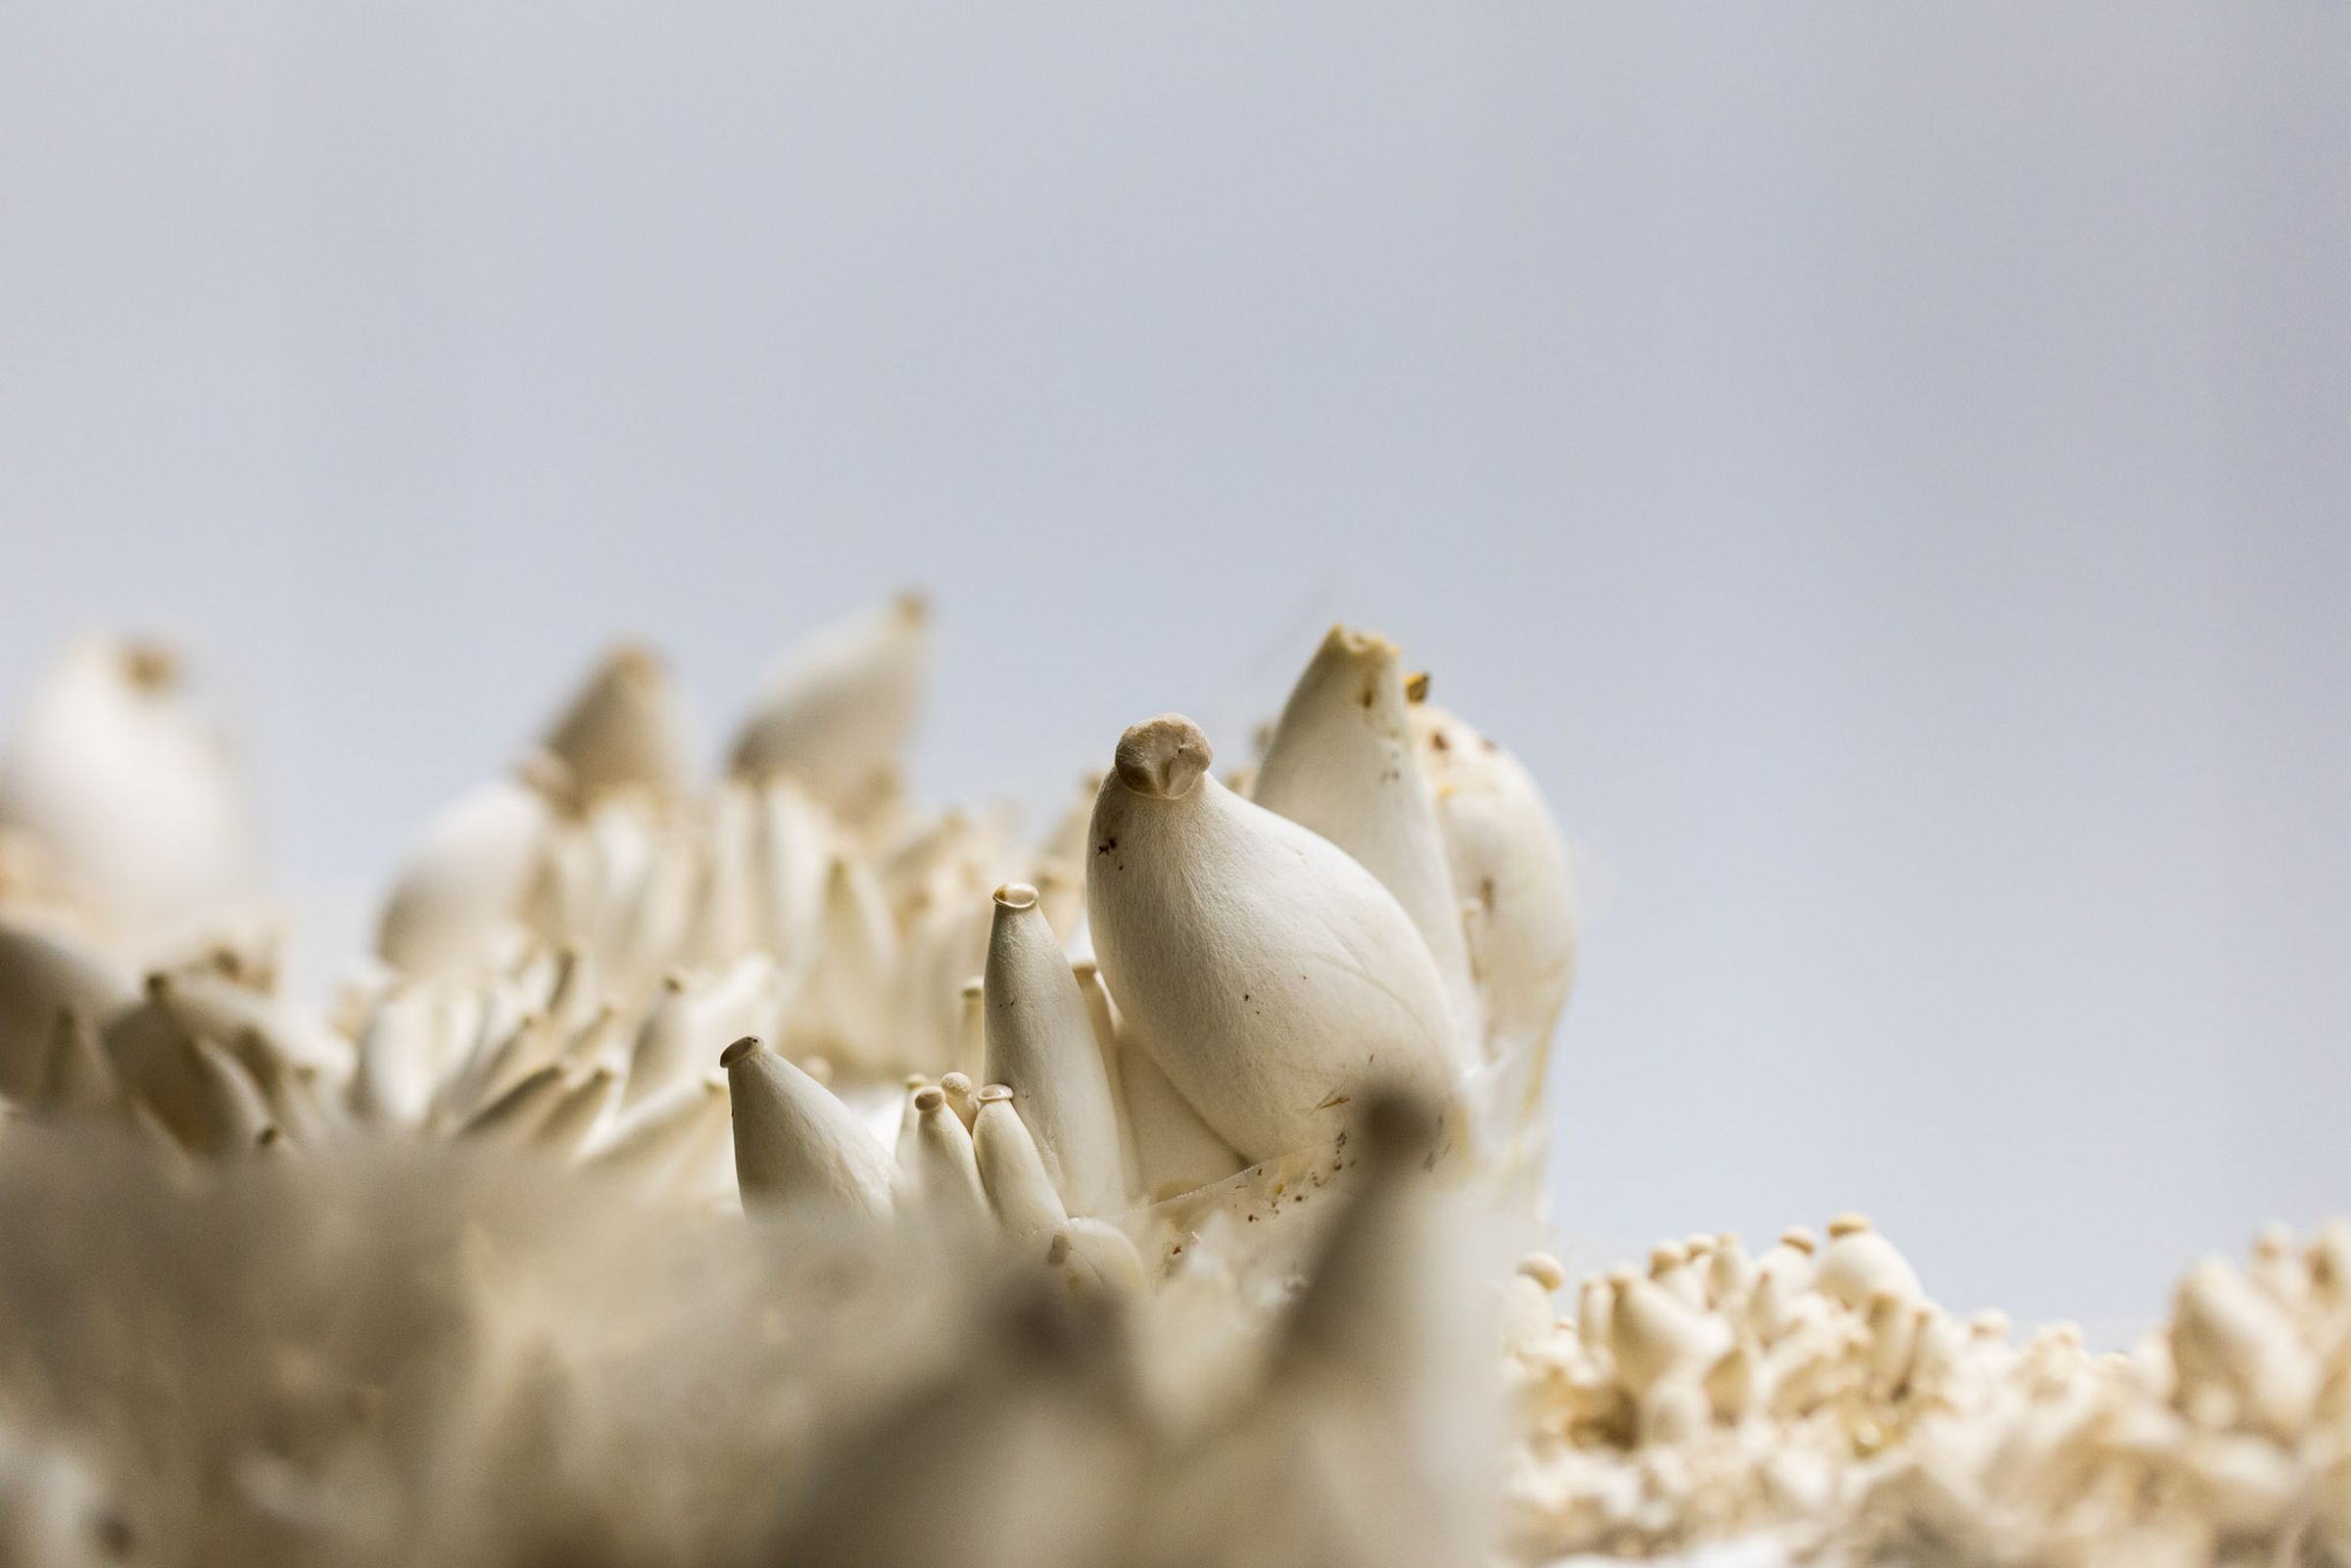 A close-up of a cluster of dozens of small, growing trumpet mushrooms.